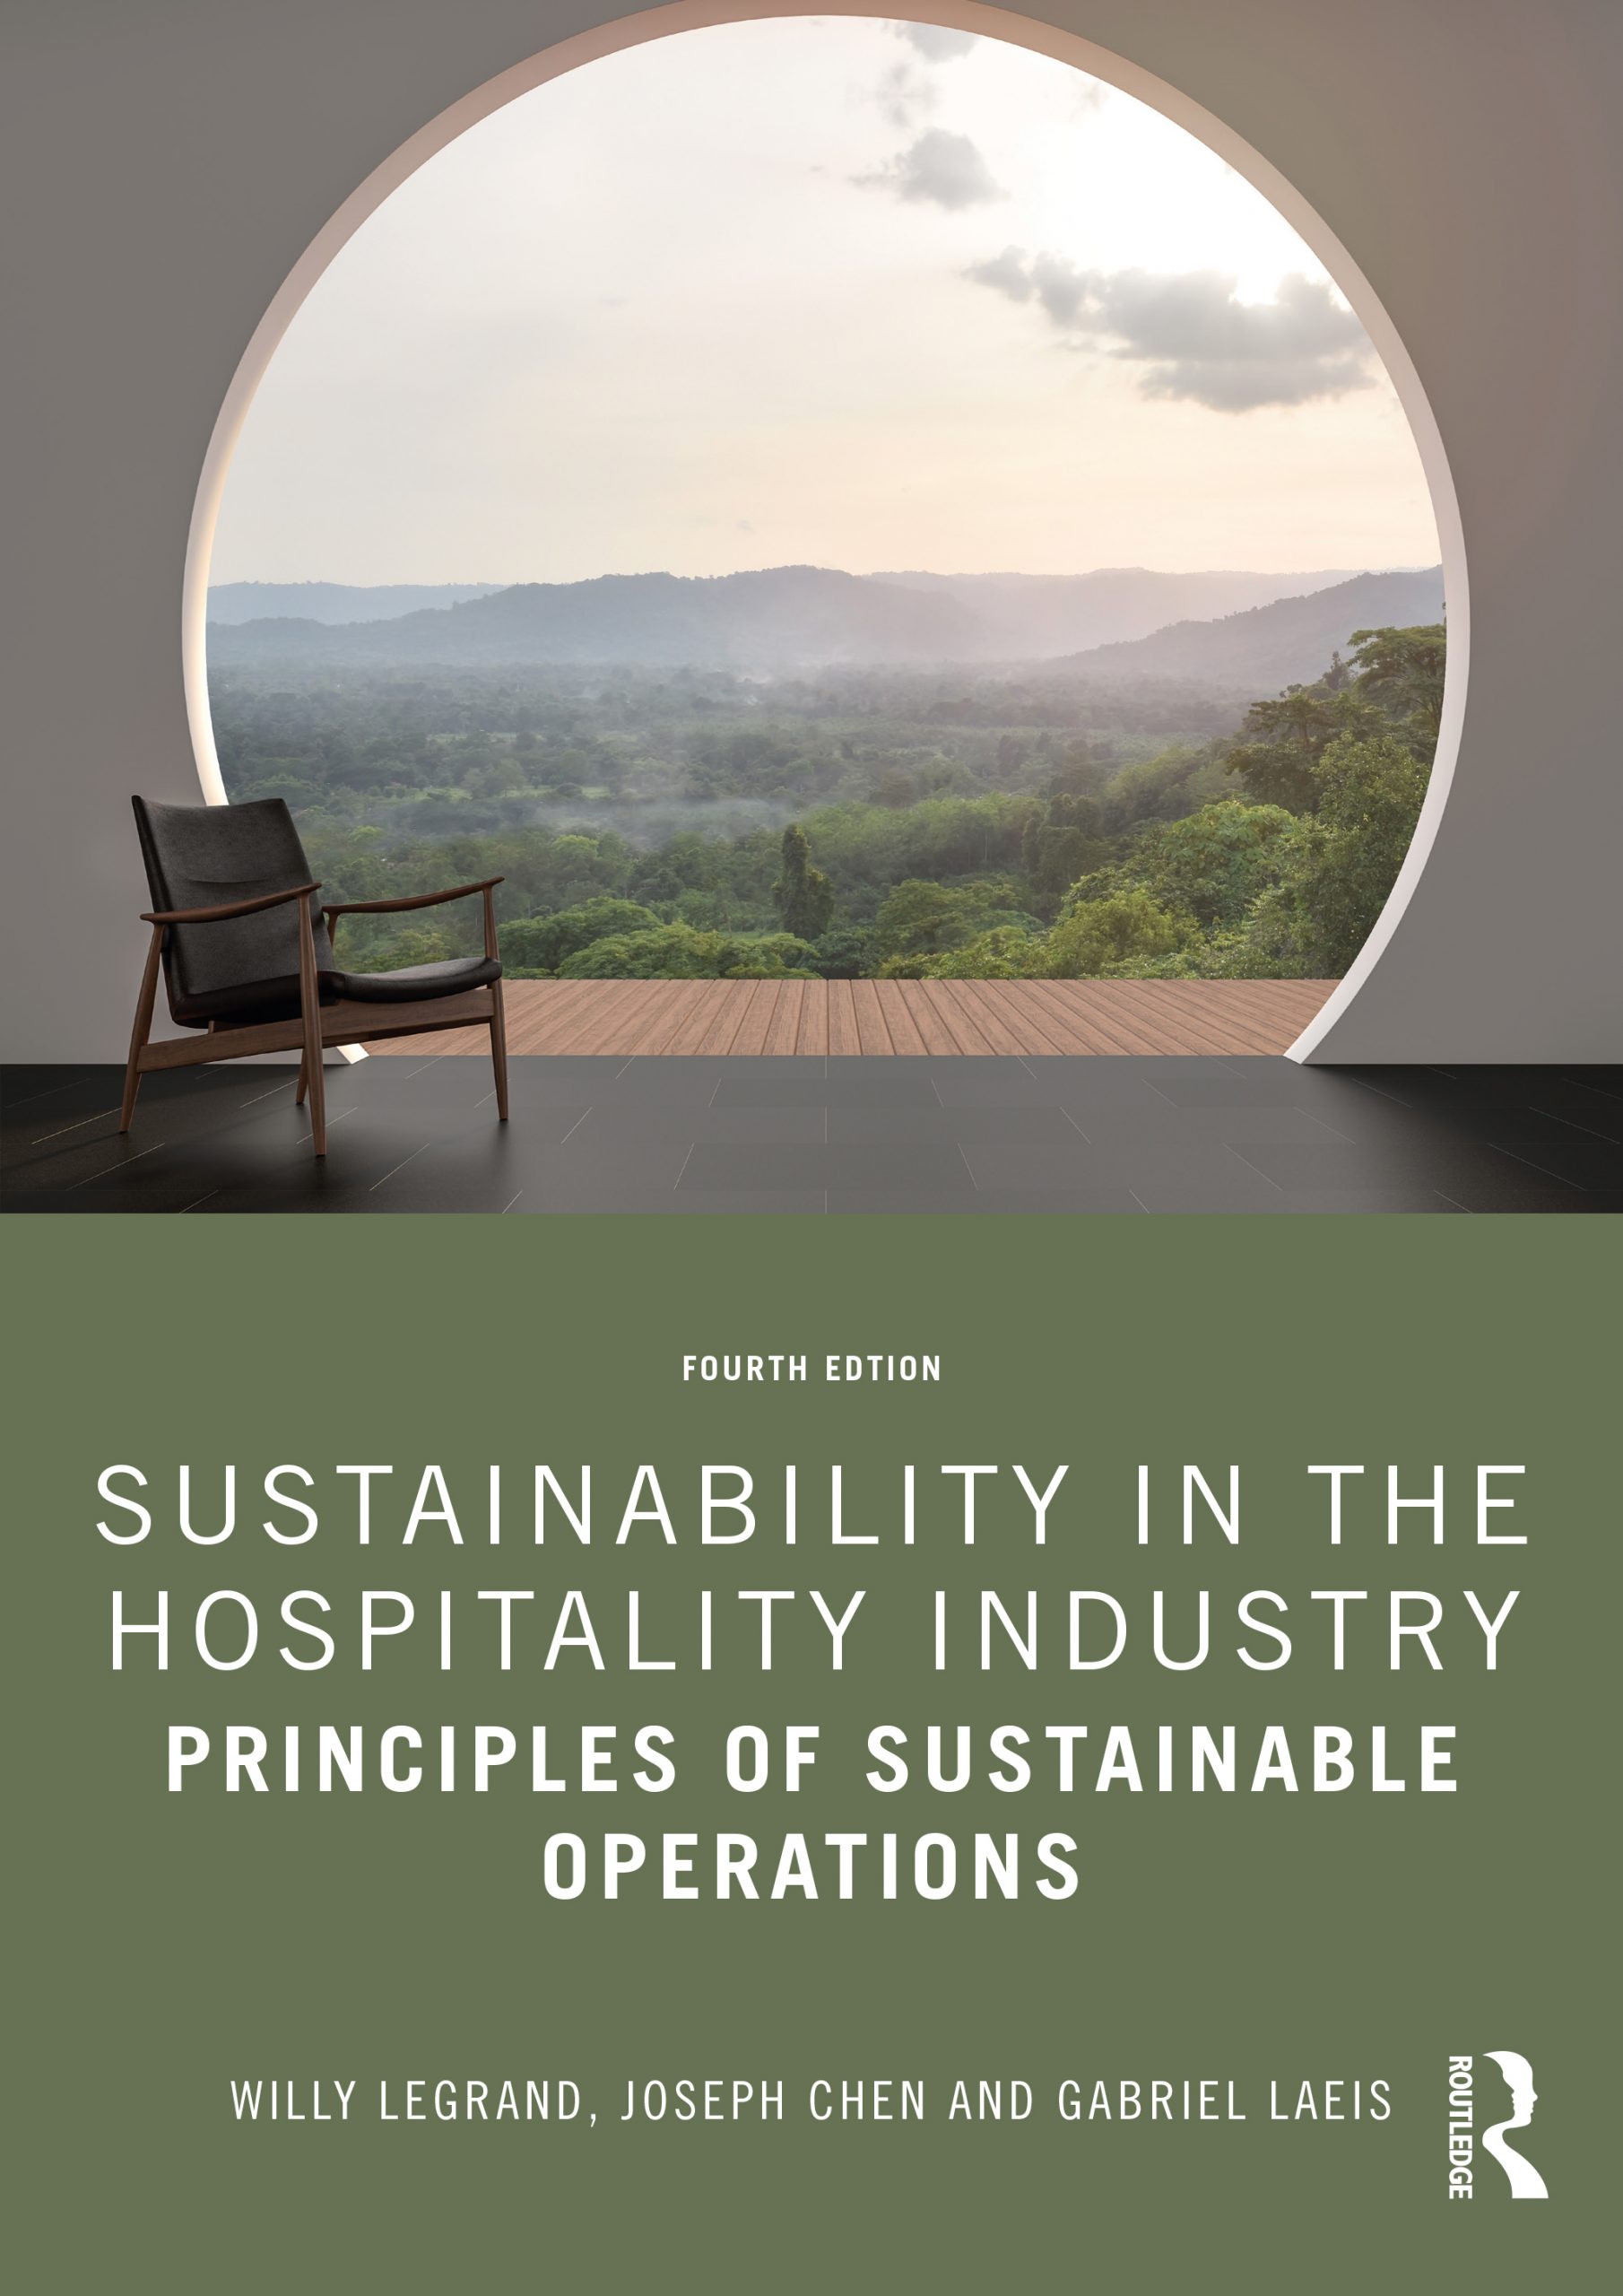 thesis sustainable hospitality